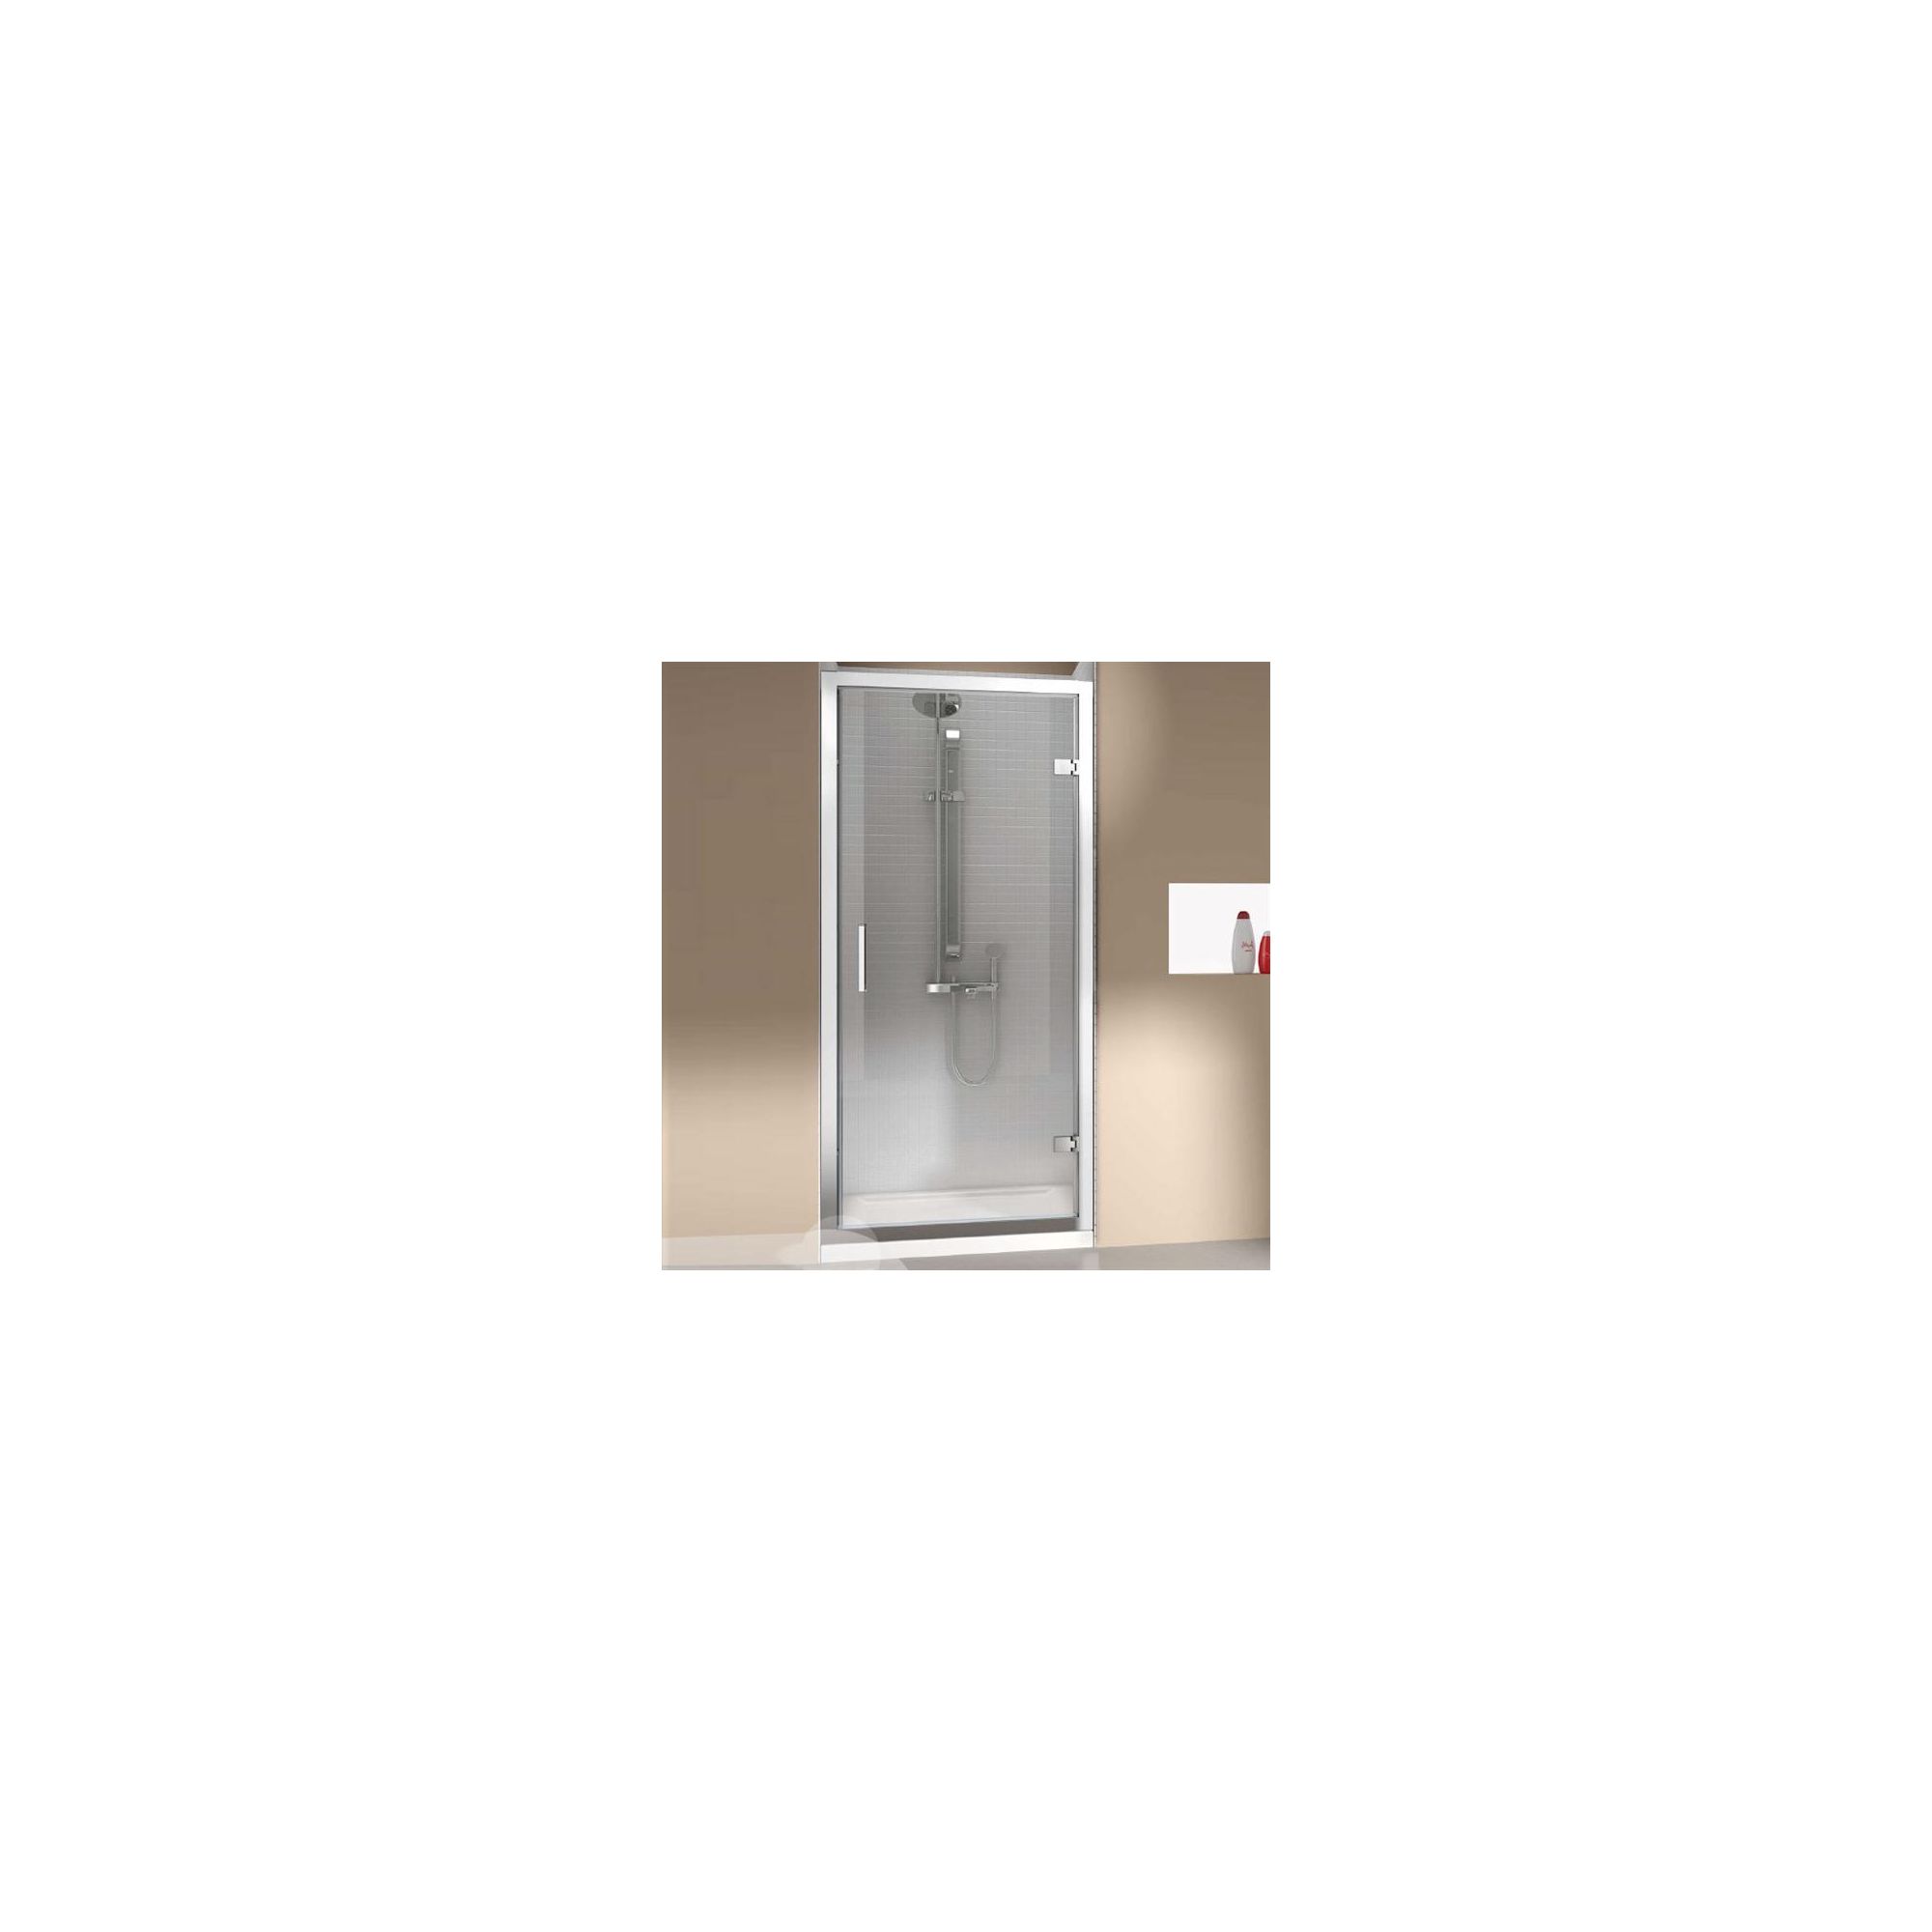 Merlyn Vivid Eight Hinged Shower Door Enclosure 800mm x 800mm (including Merlyte Tray) at Tesco Direct